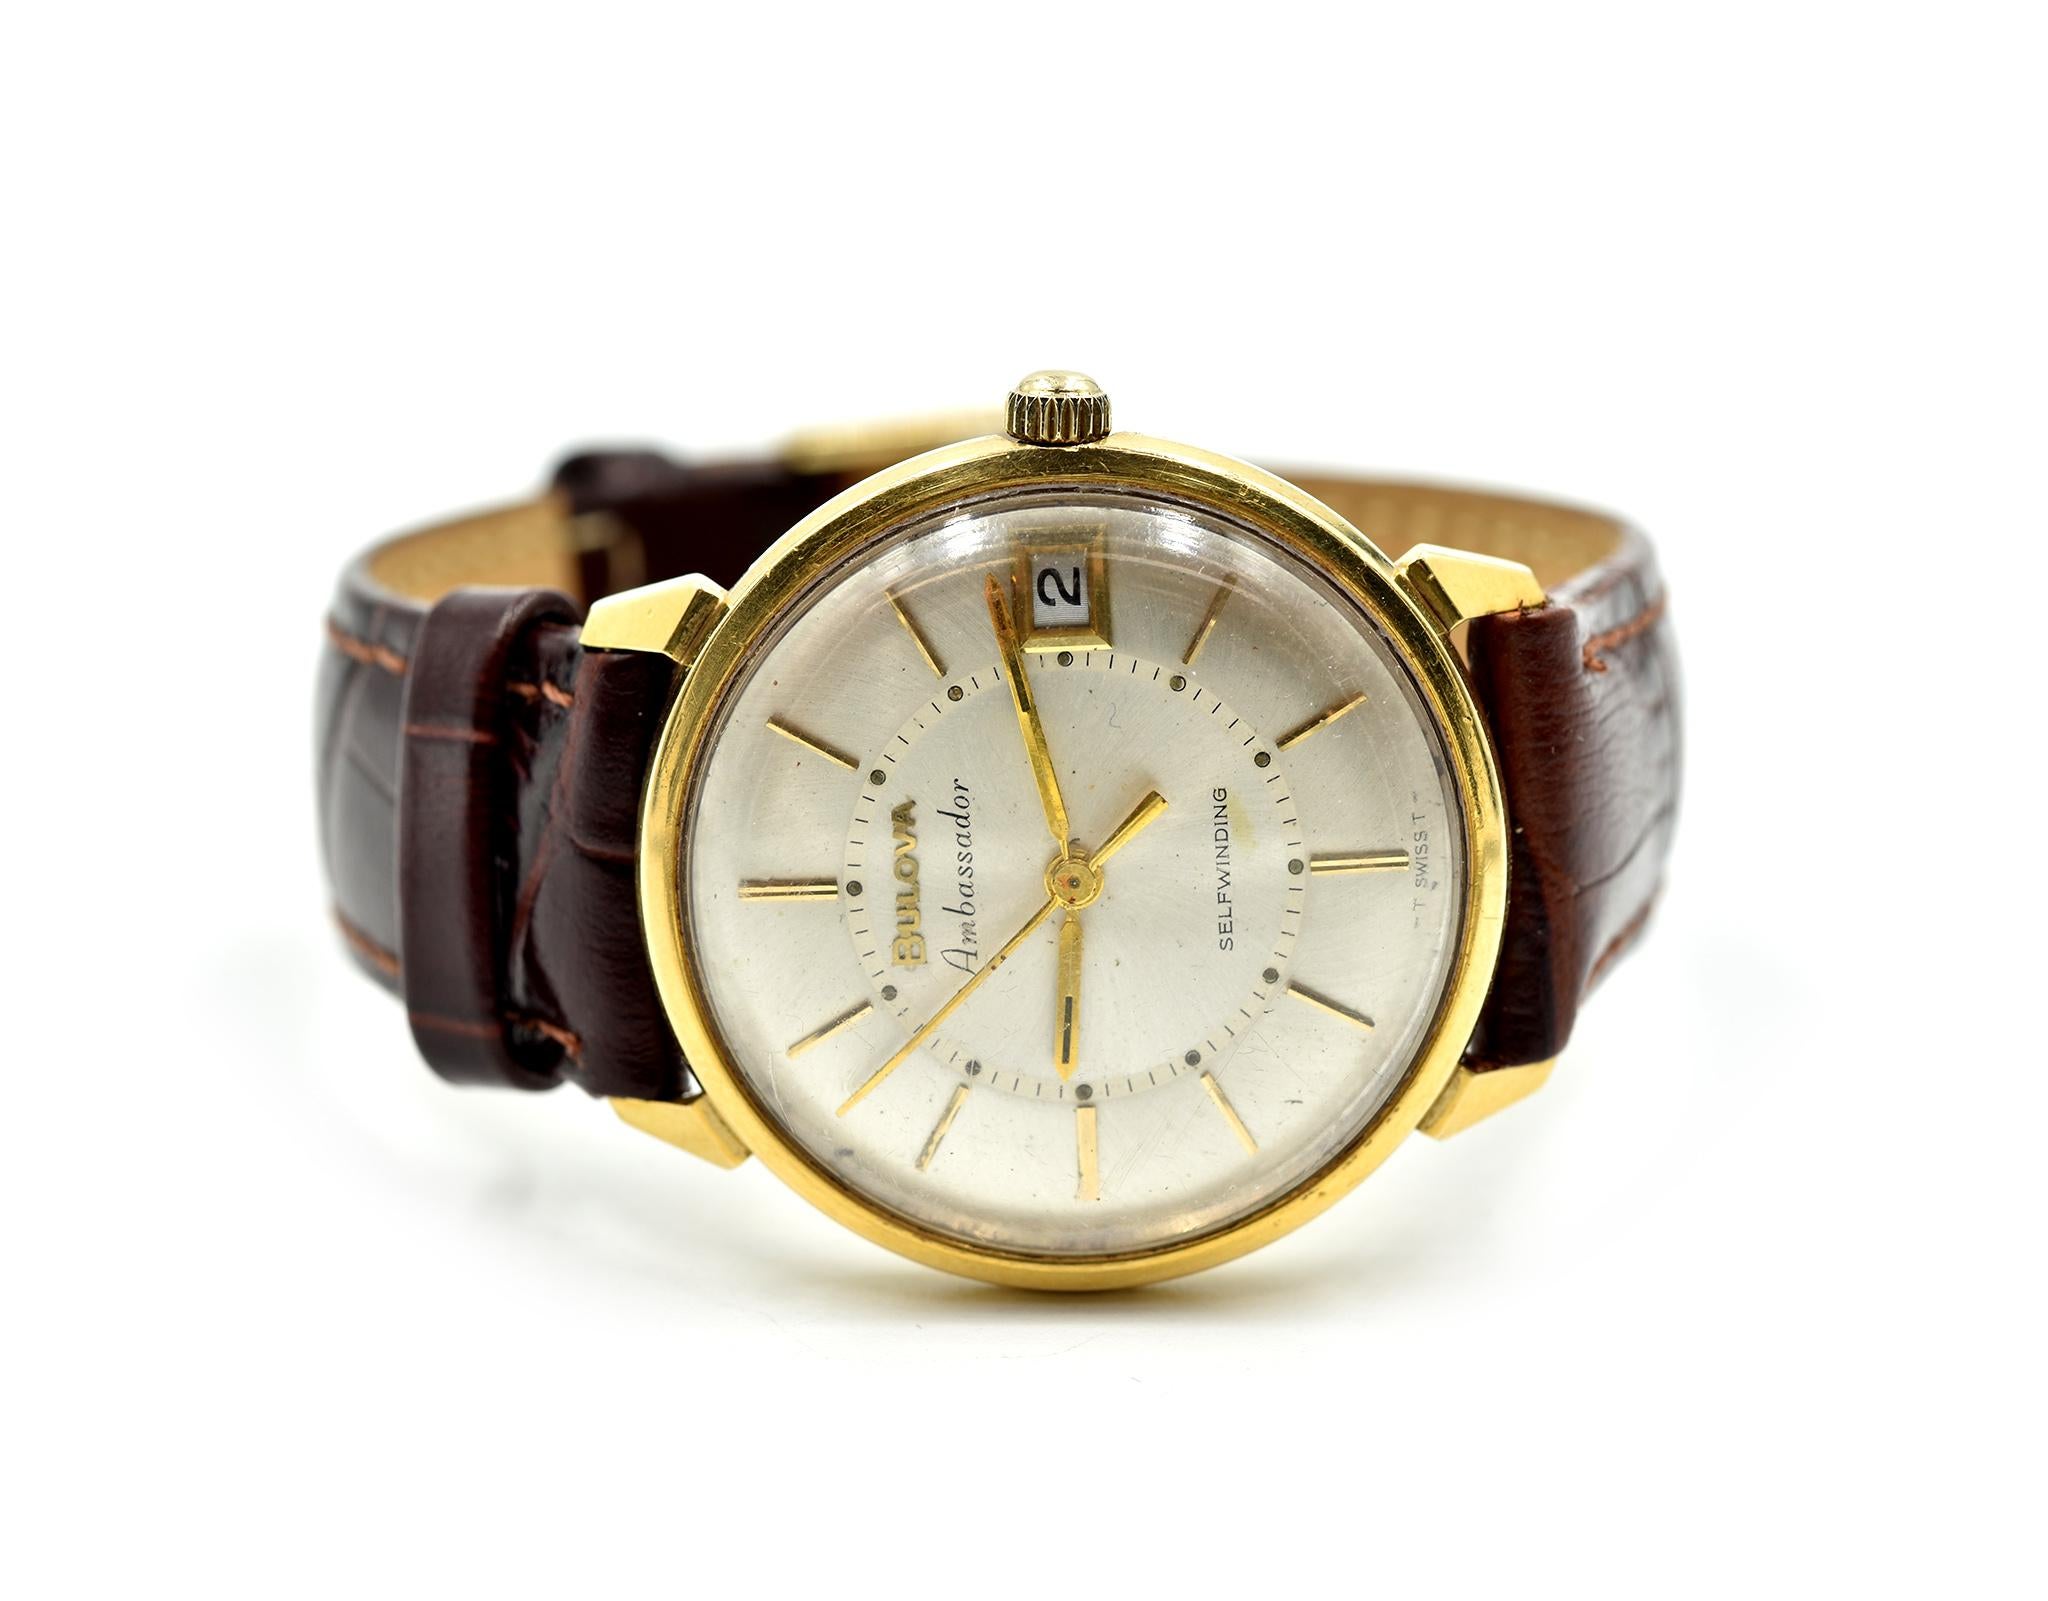 Movement: automatic, shock proof, anti-magnetic
Function: hours, minutes, sweep seconds, date
Case: 33mm 18k yellow gold case, acrylic (plastic) crystal
Band: generic brown leather strap, gold plated buckle
Dial: silver dial, gold hands, gold hour